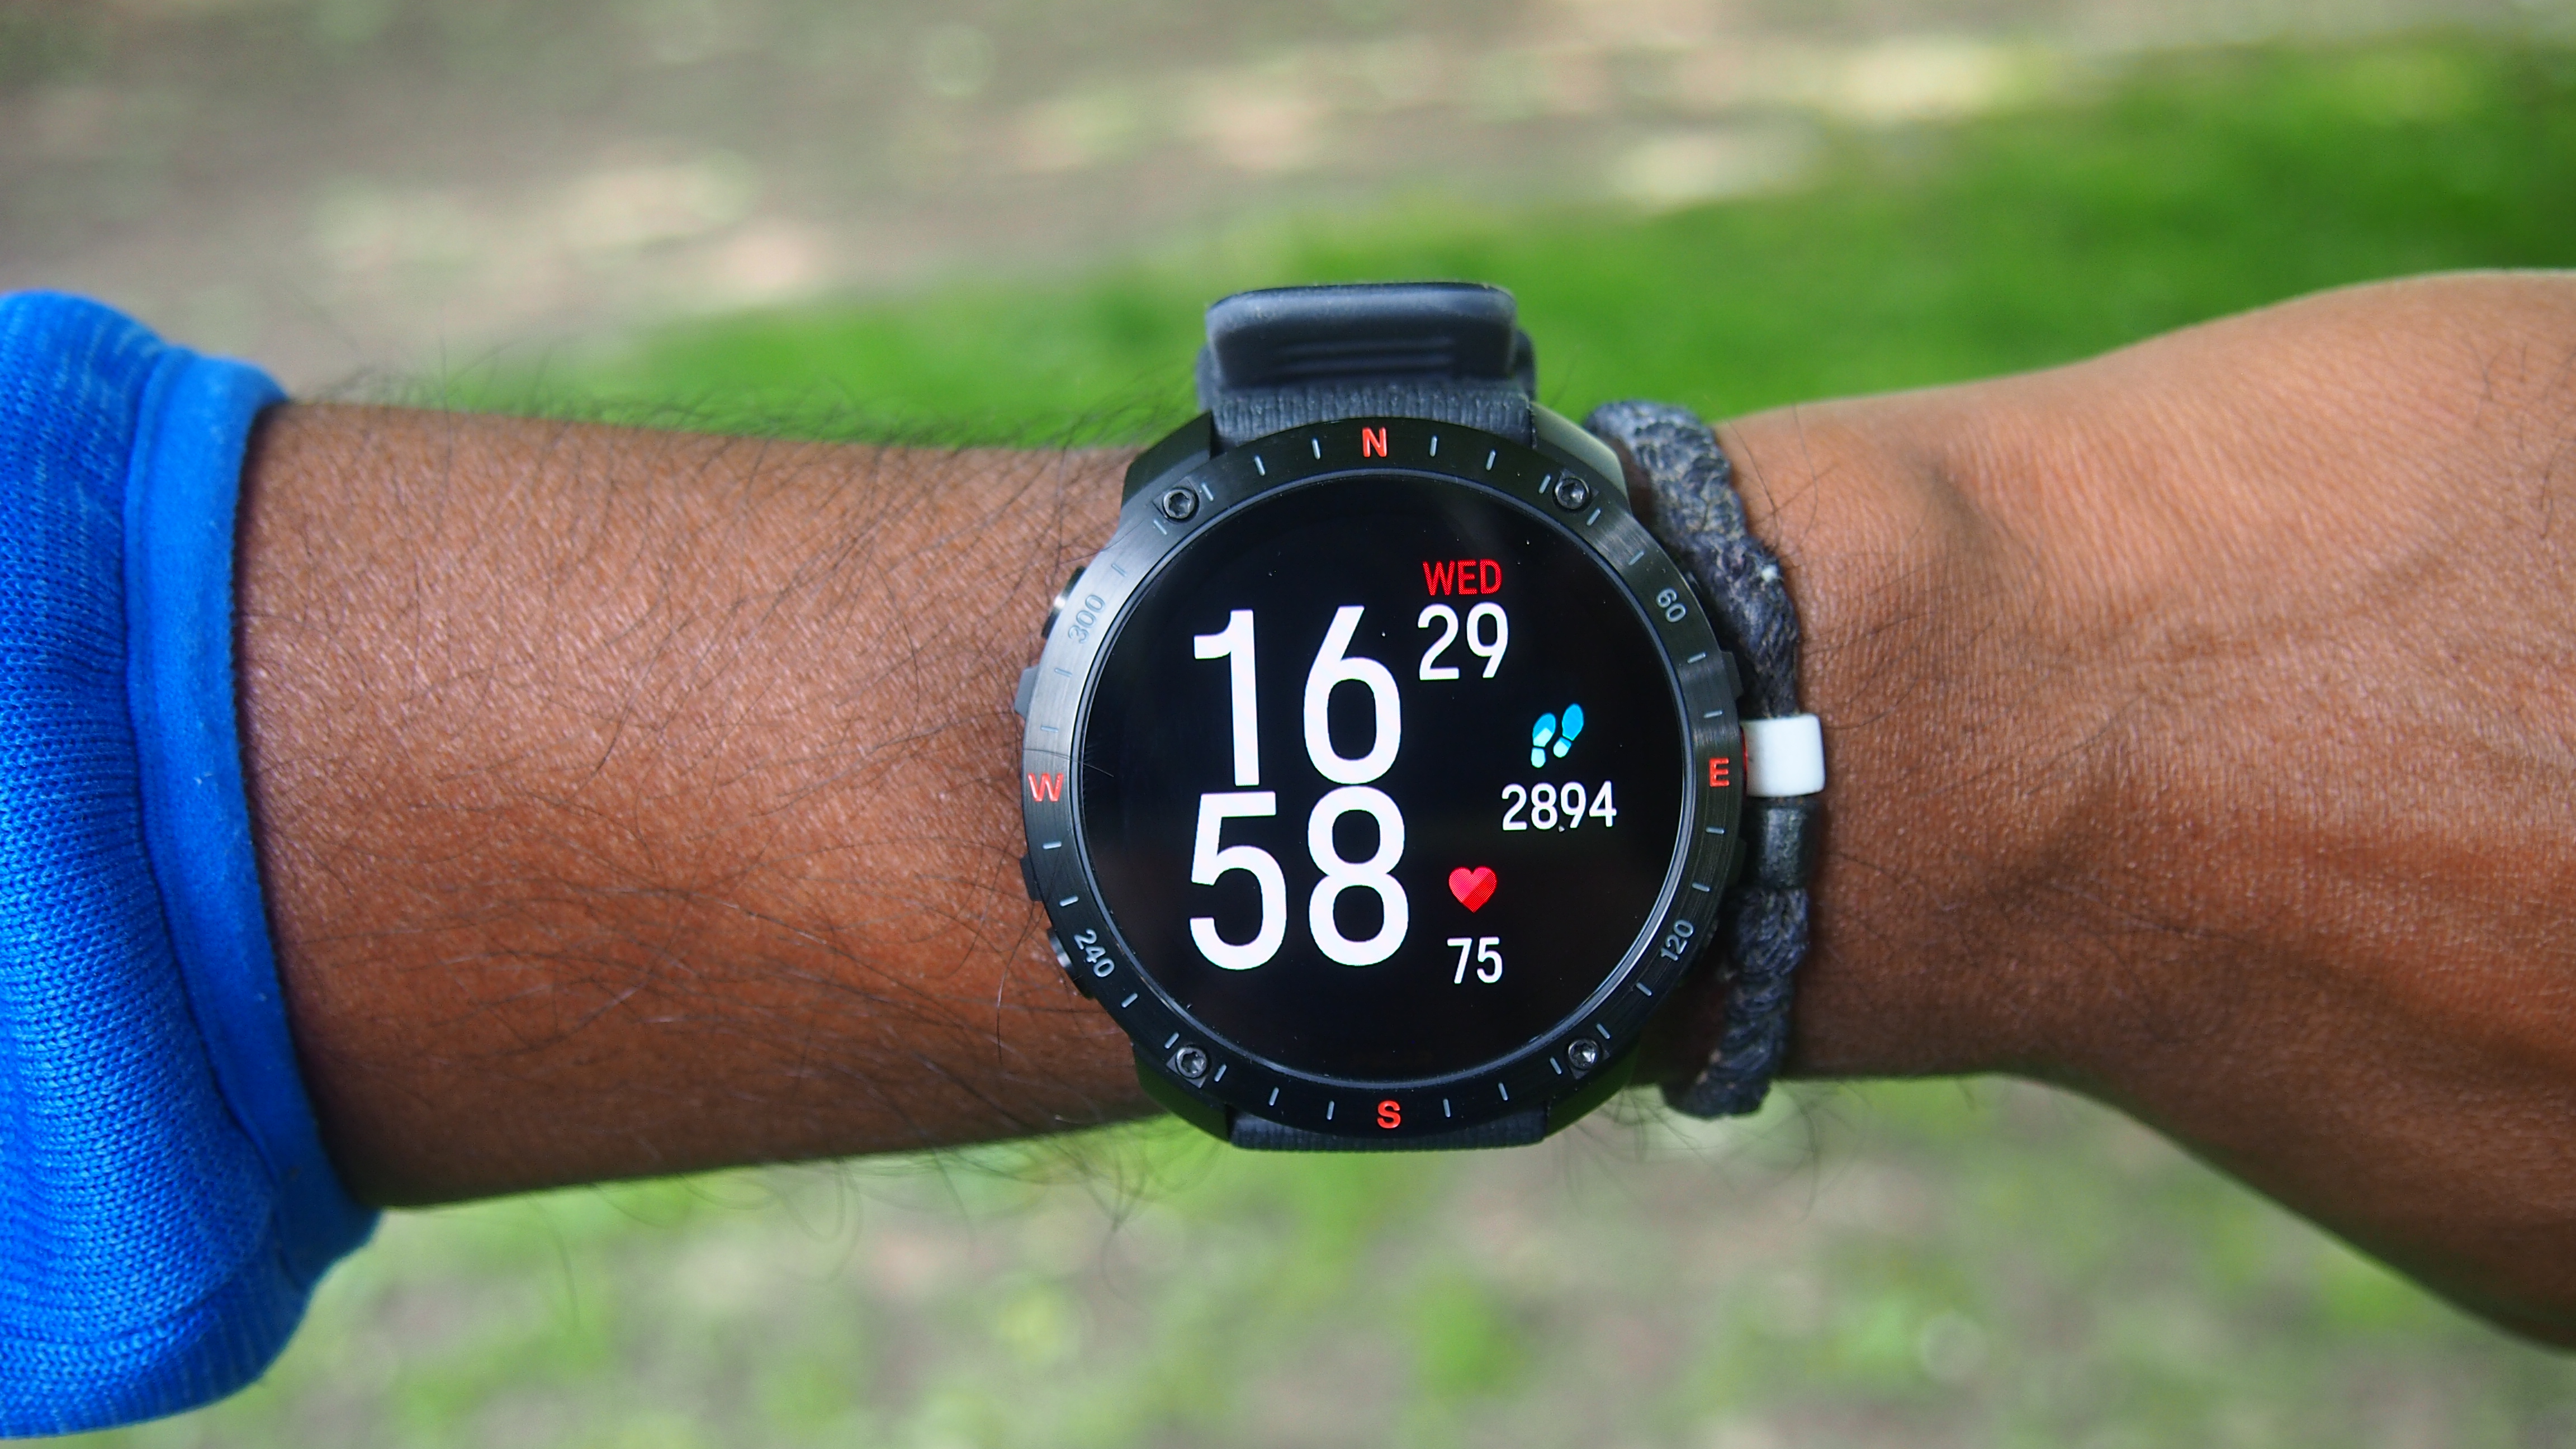 Polar Grit X2 Pro watch worn on the wrist with clock face and step count